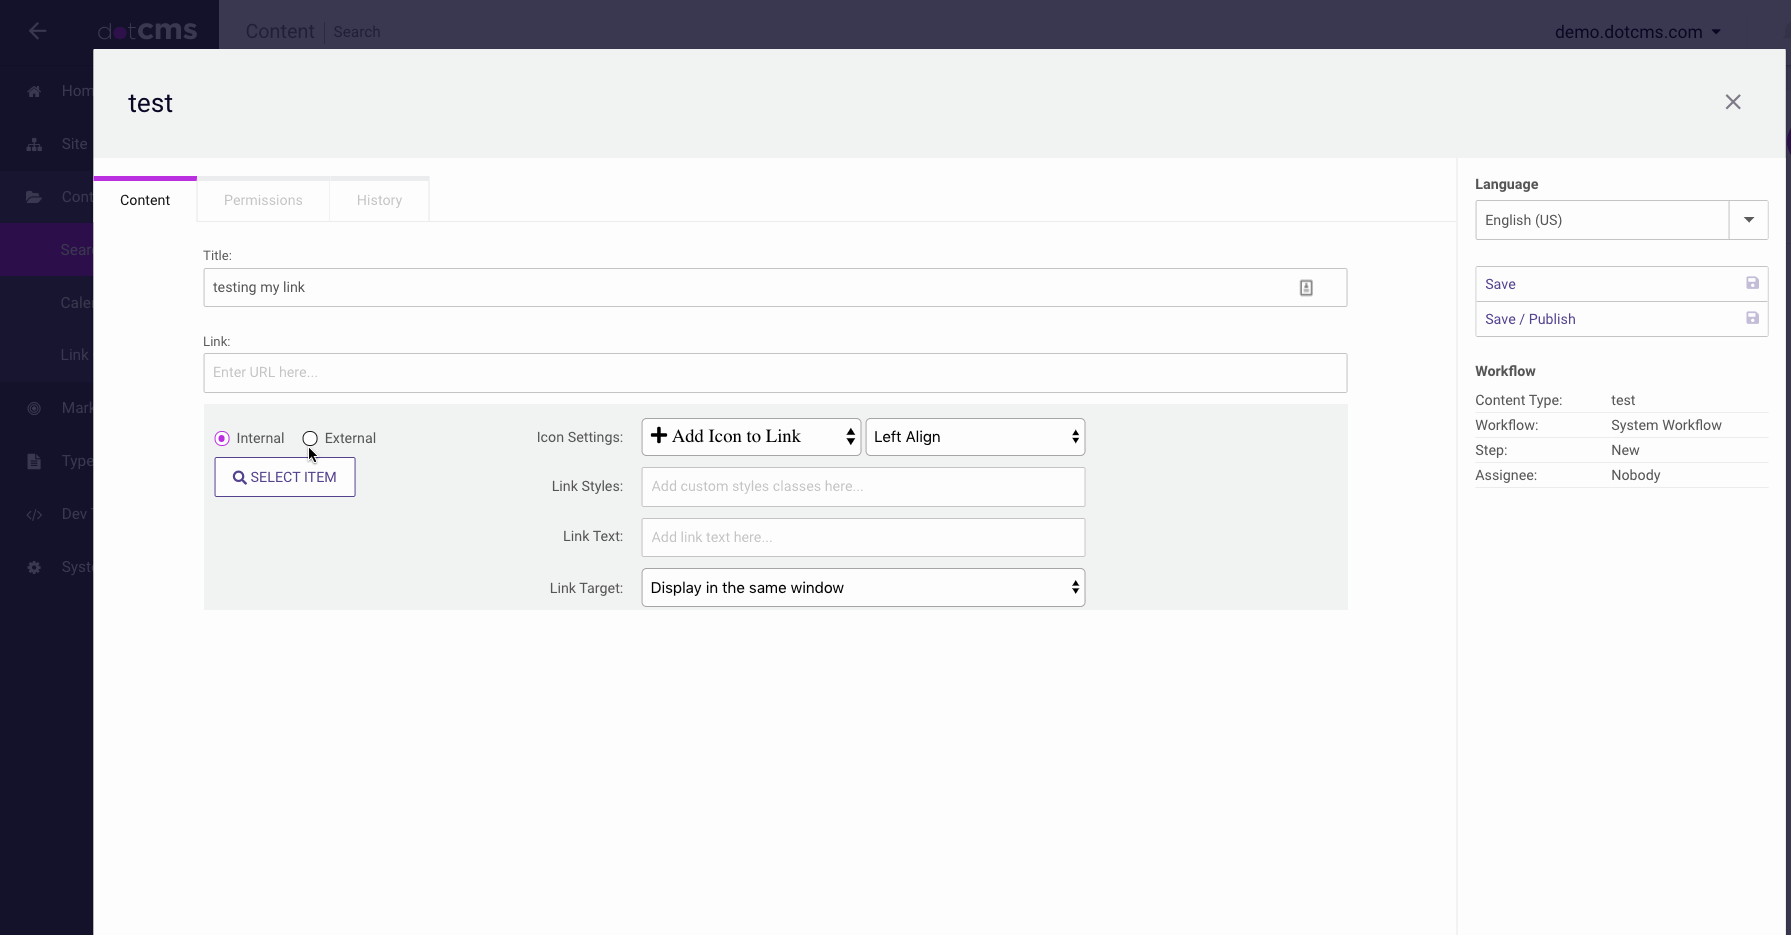 Custom Field: Linking to different Content